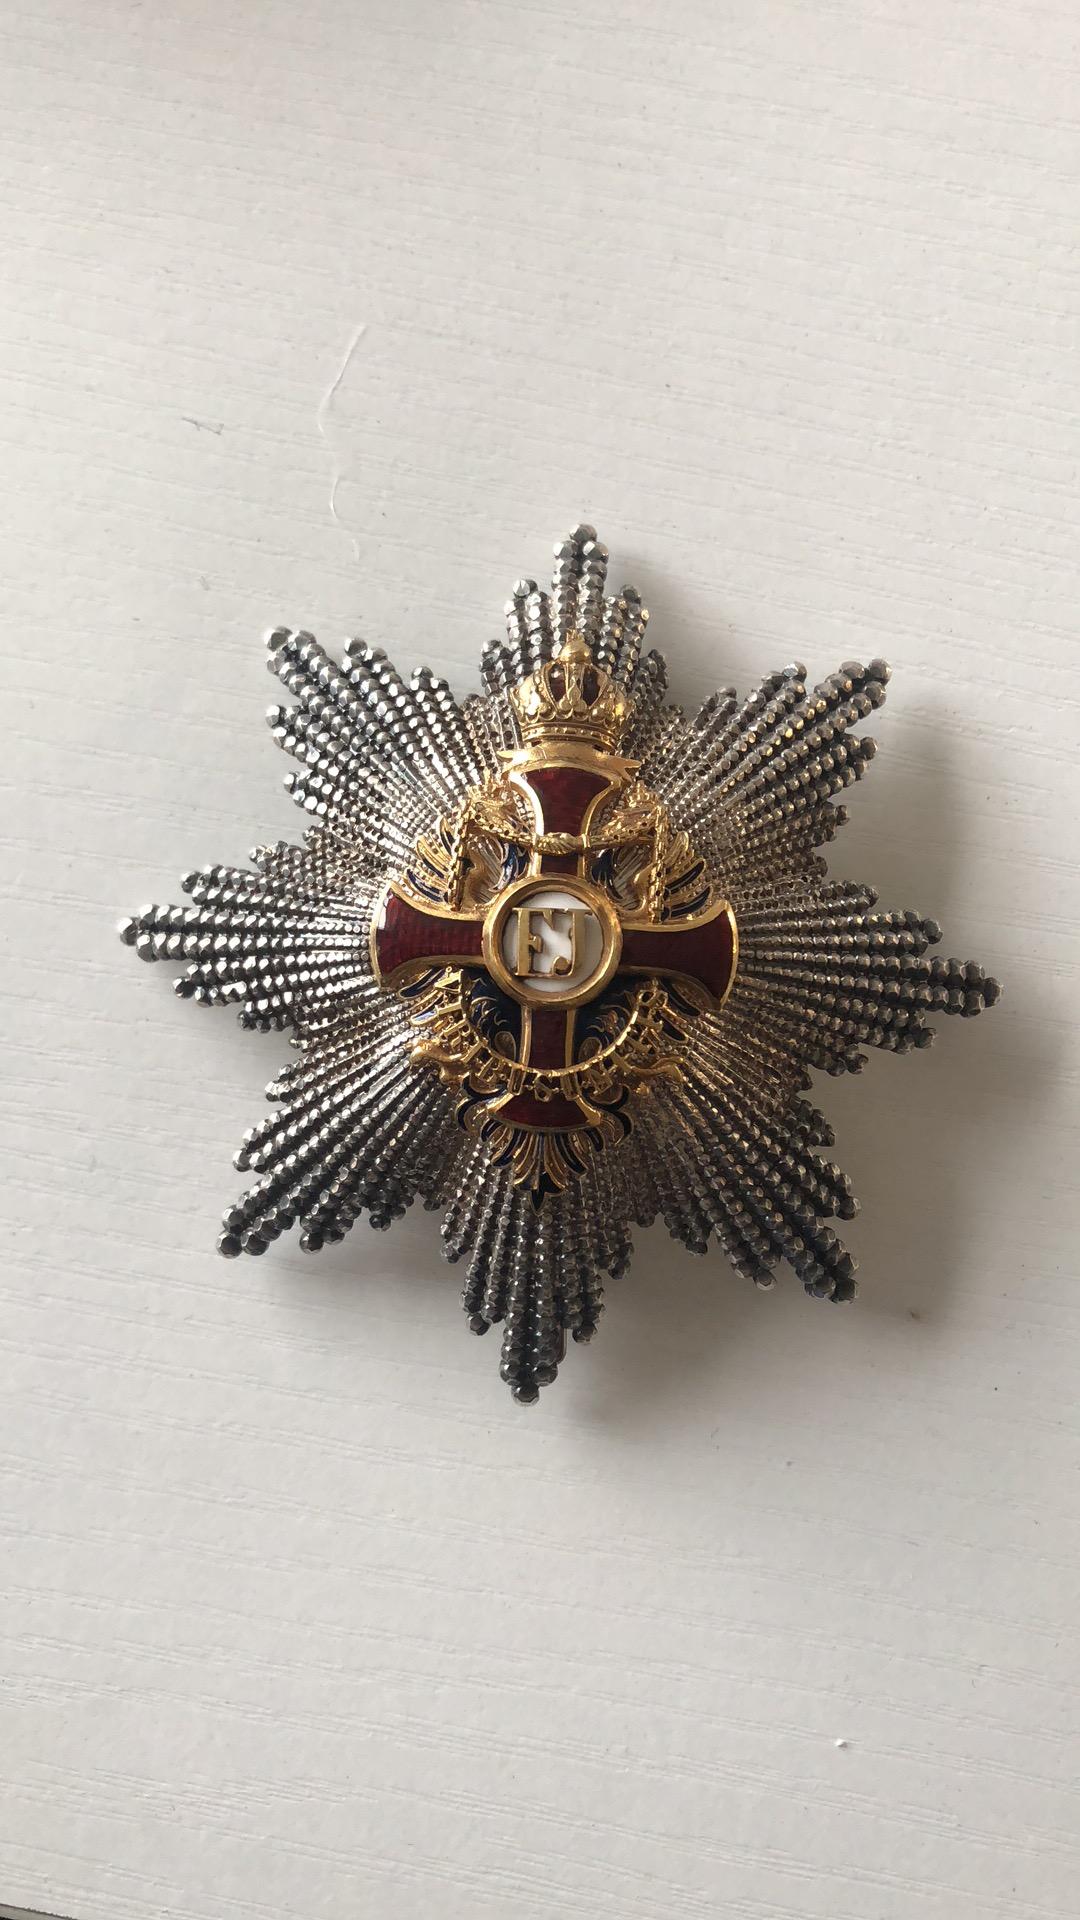 Help on this commander star of the order of Franz Joseph - Austro ...